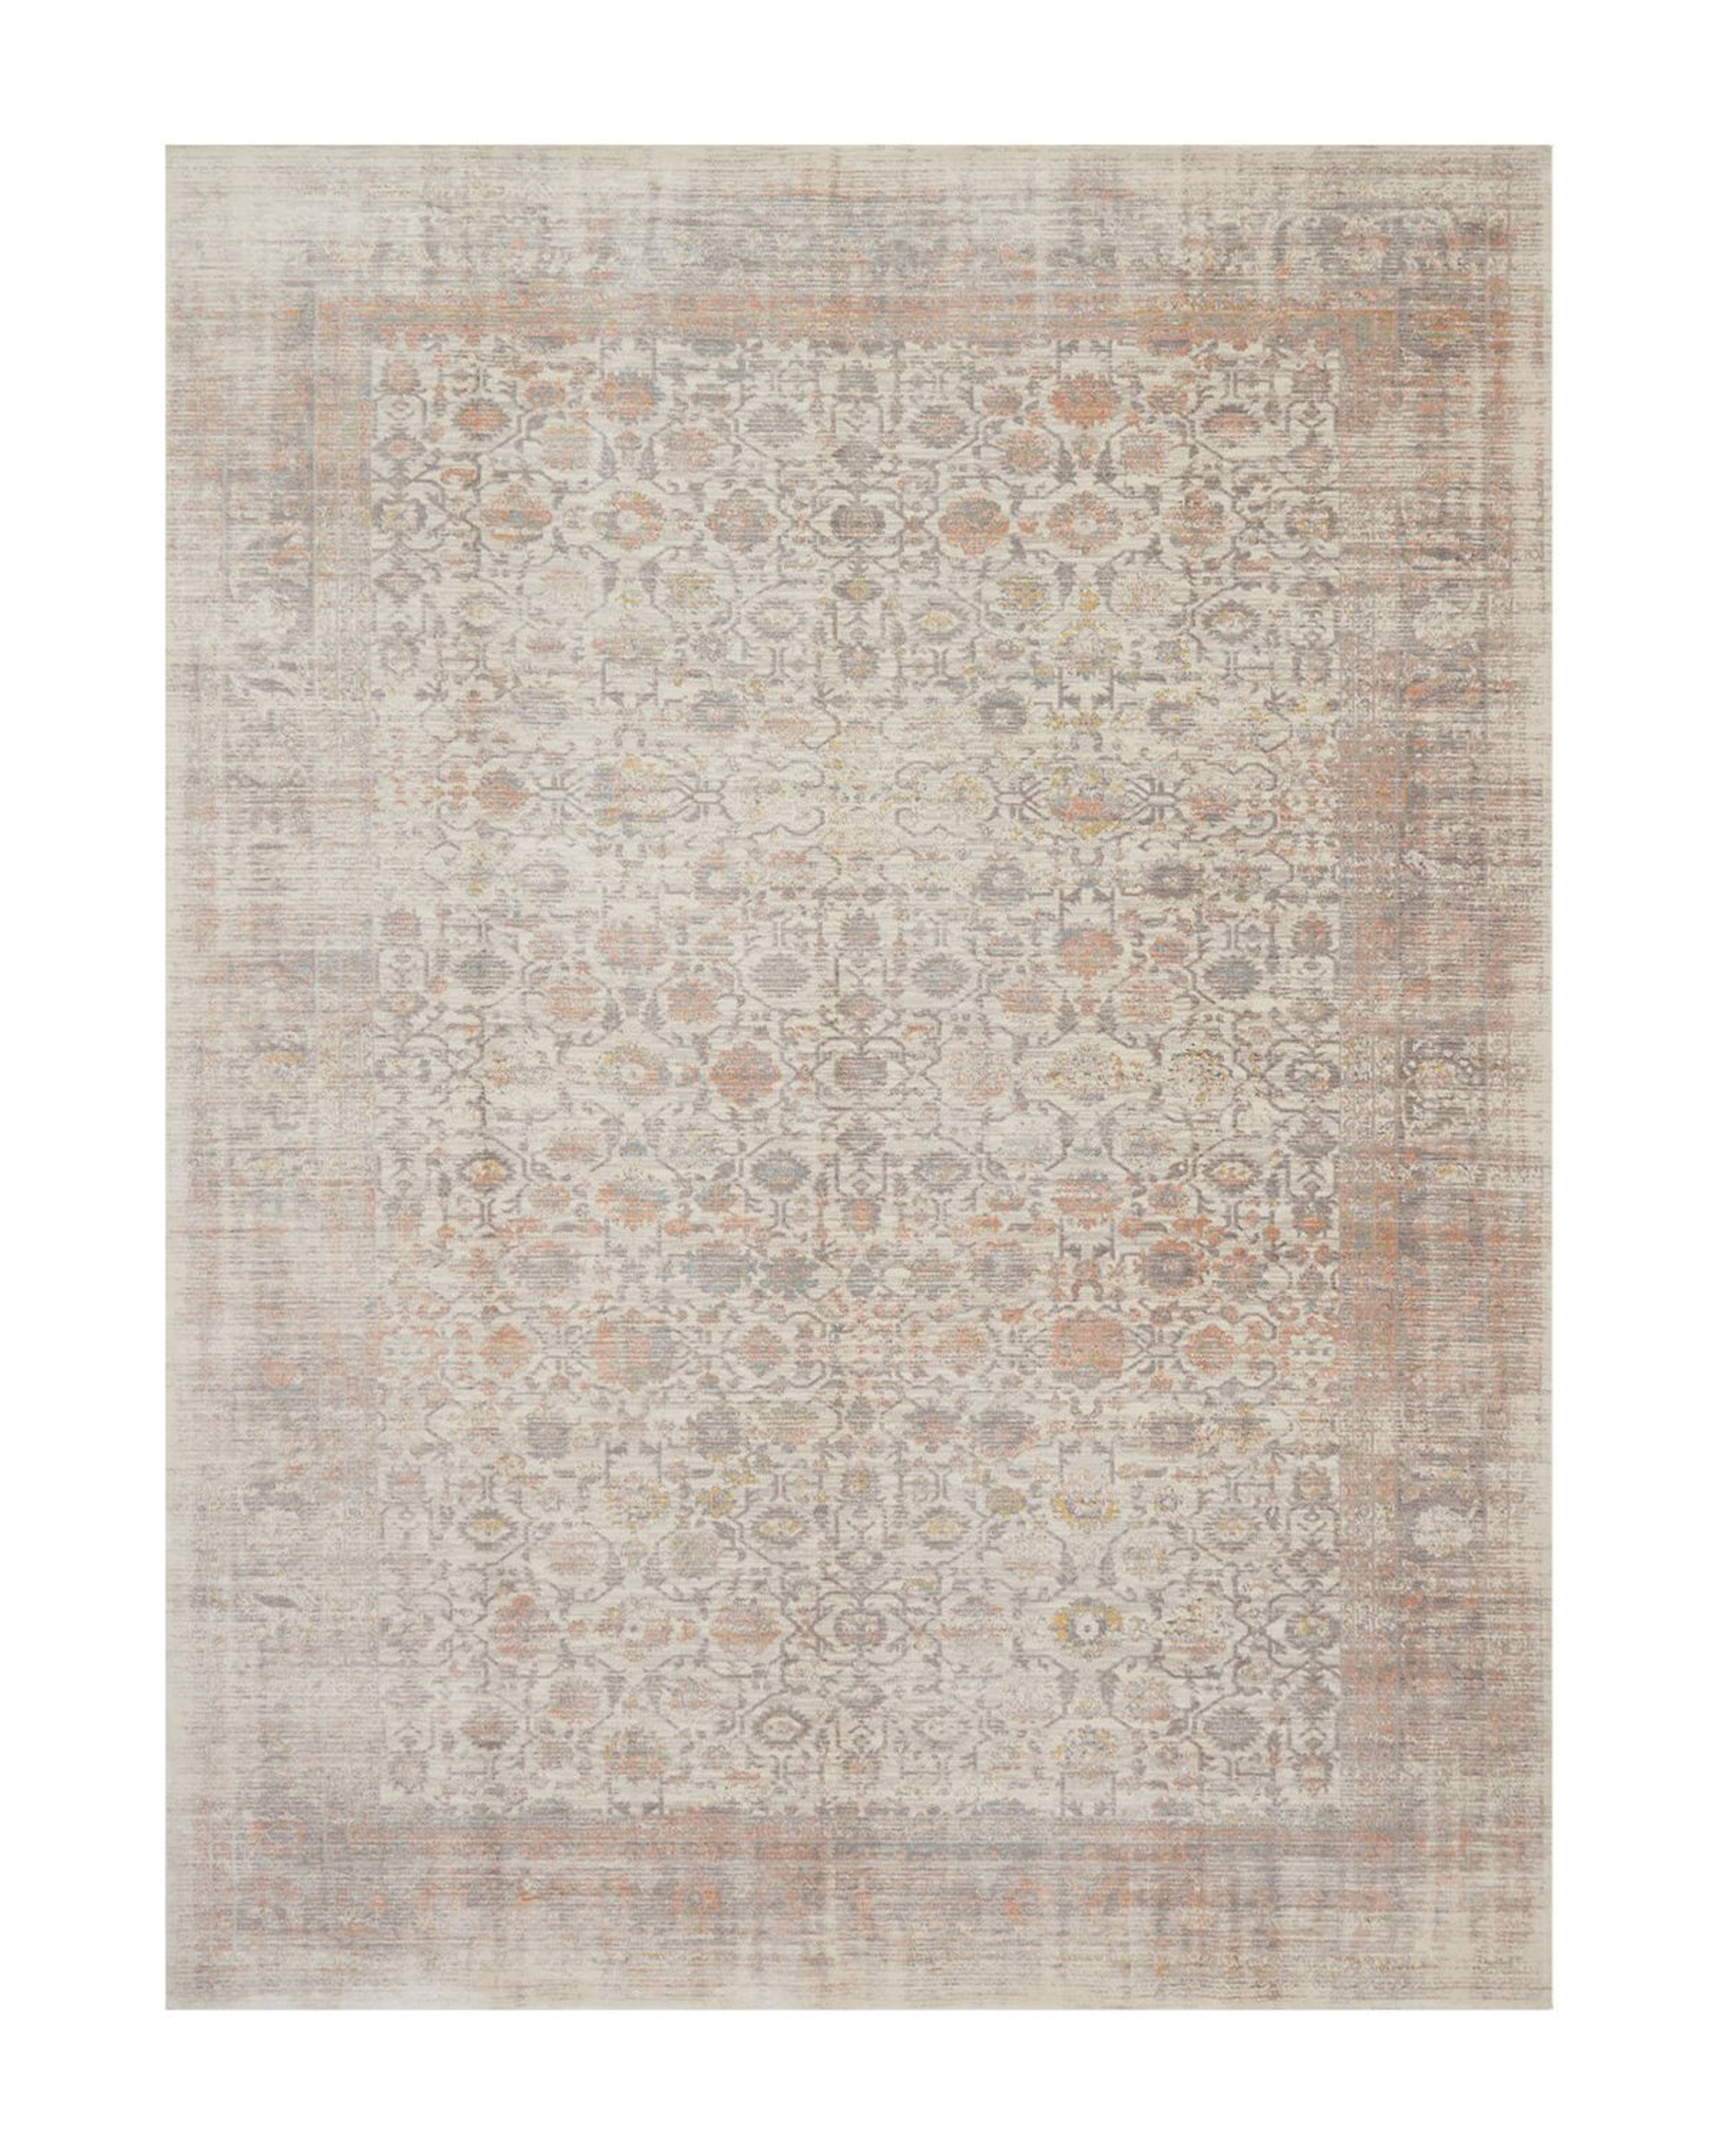 LEIDEN PATTERNED RUG, 6'7" x 9'2" - McGee & Co.